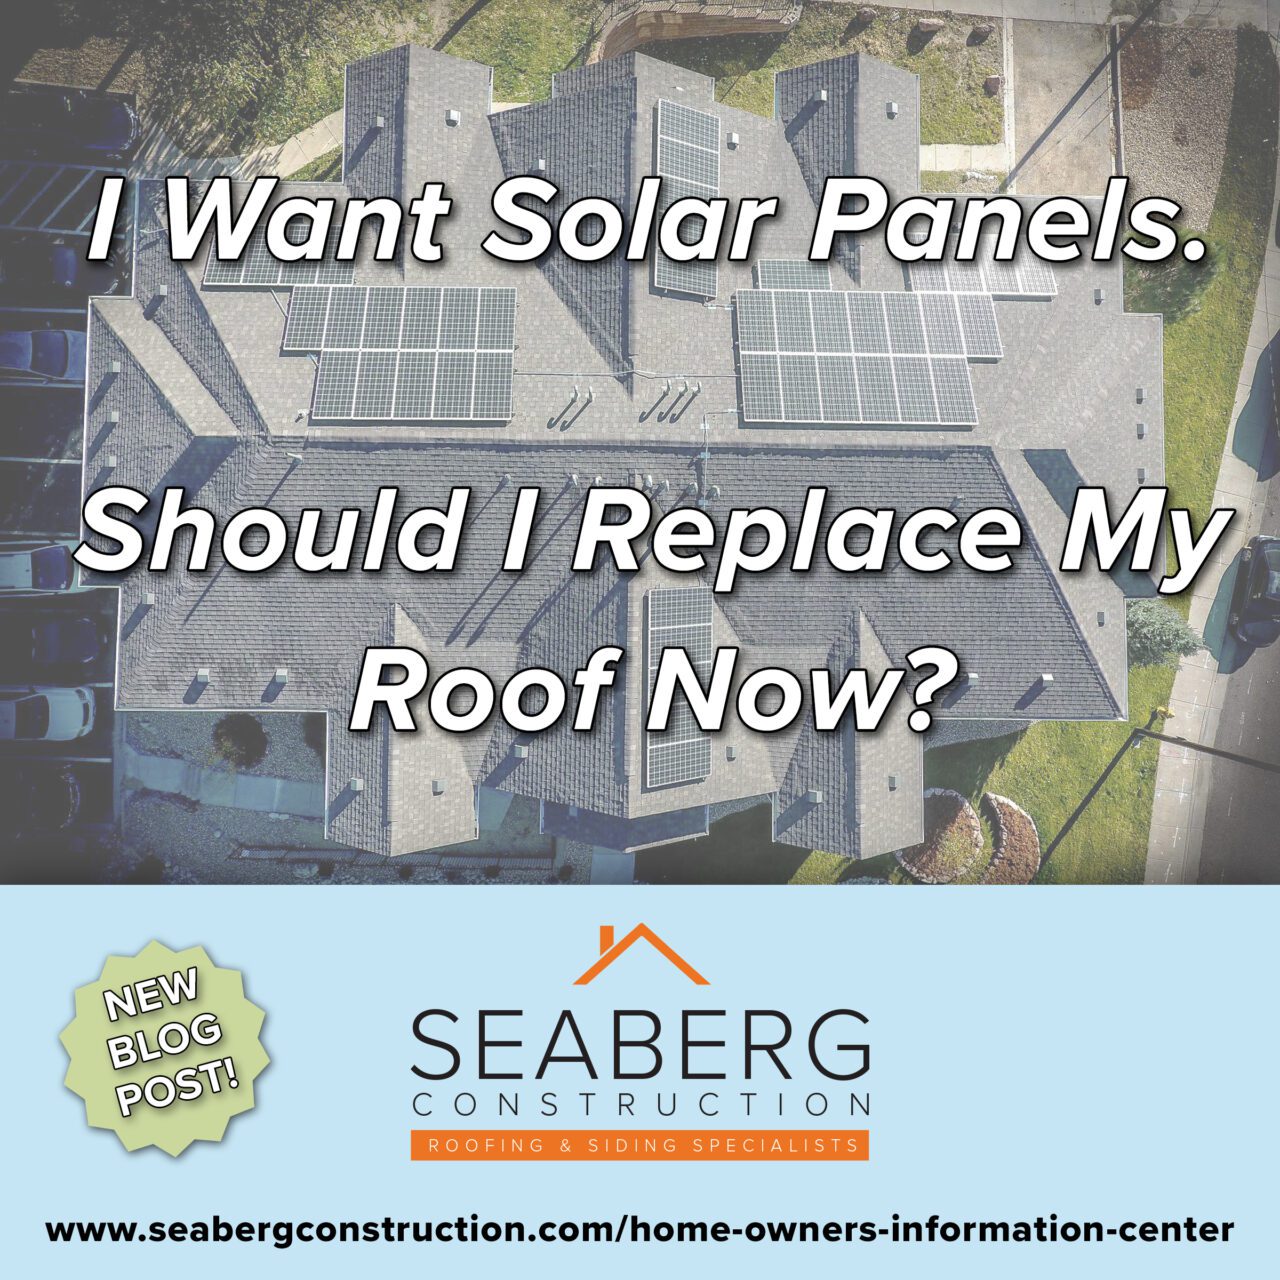 Seaberg Construction Blog: I Want Solar Panels Should I ReplaceMy Roof Now?